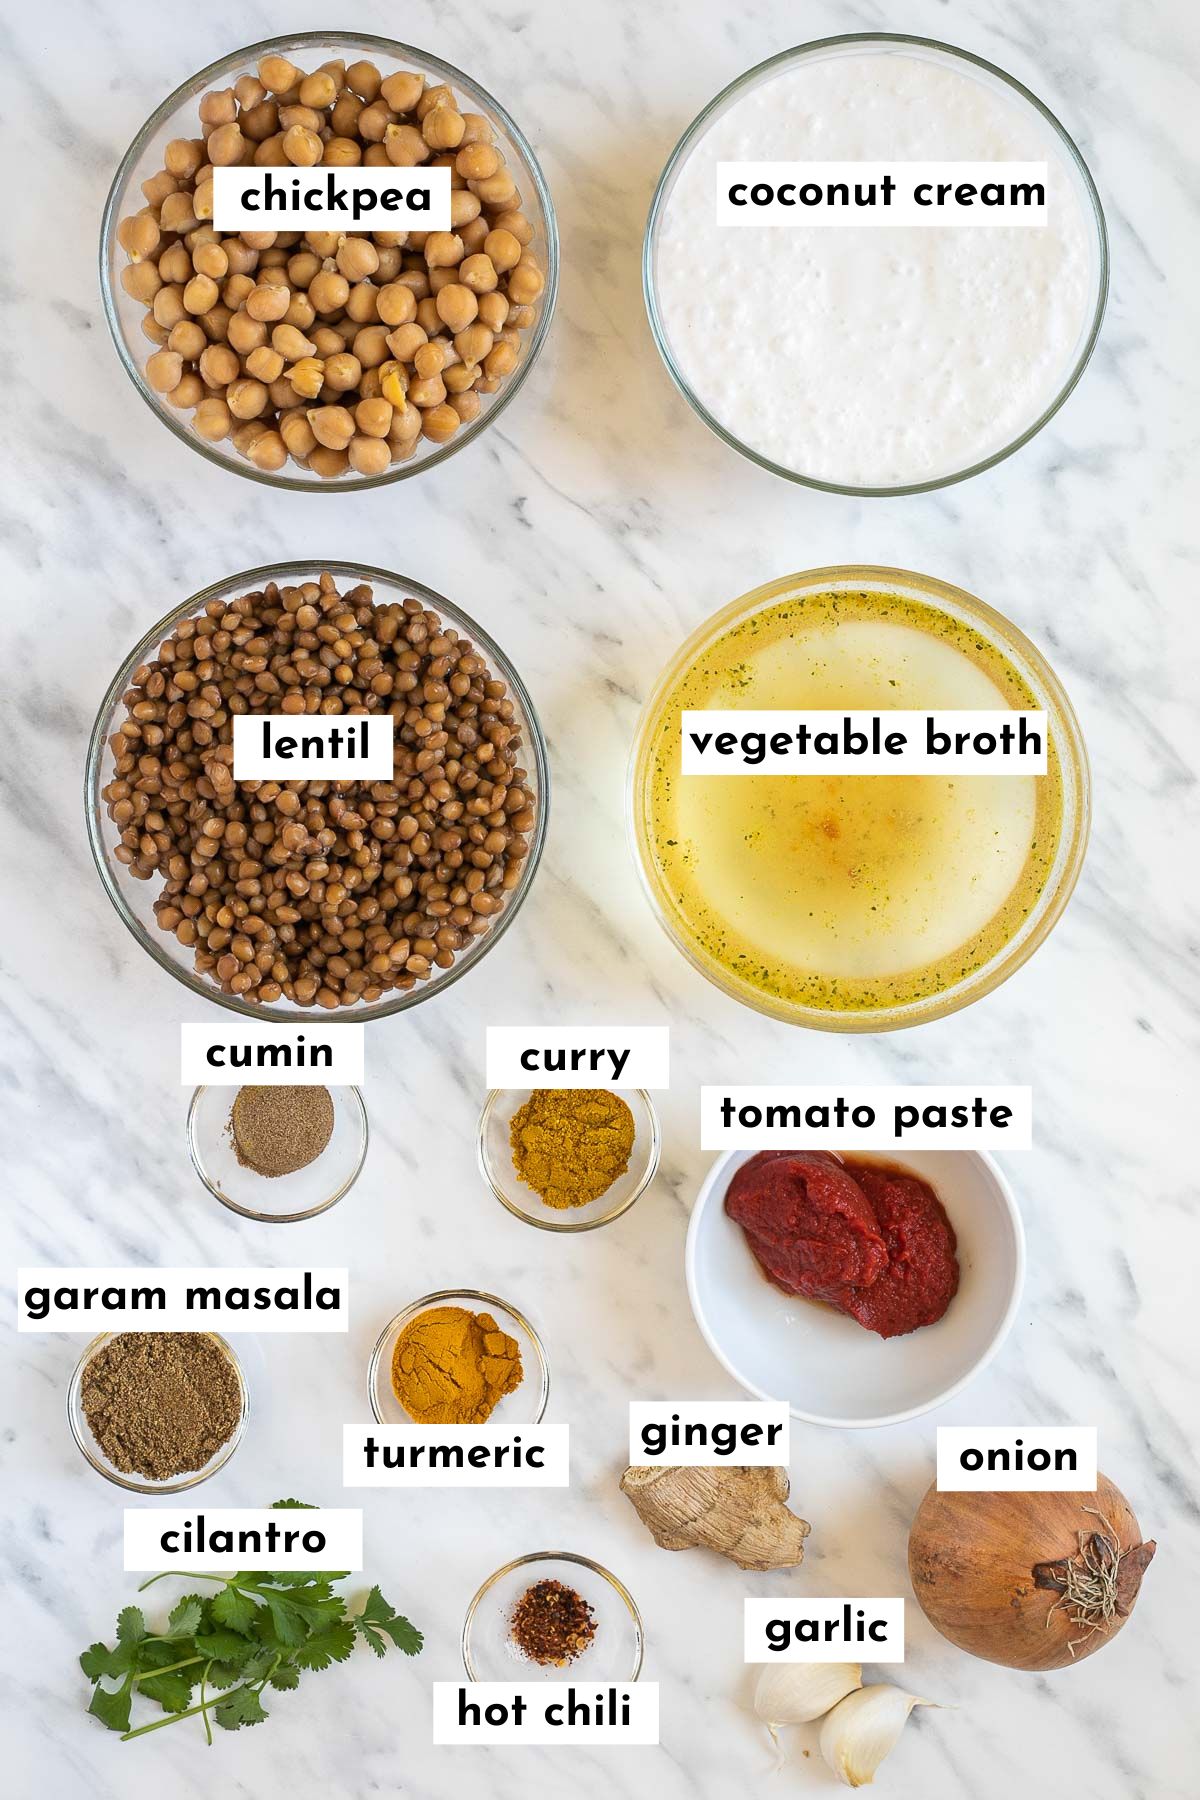 The ingredients of lentil chickpea curry is placed in small glass bowls like chickpeas, lentils, coconut cream, veggie broth, tomato paste, onion, ginger, cilantro, and various spices in different shades of brown, red and yellow. 